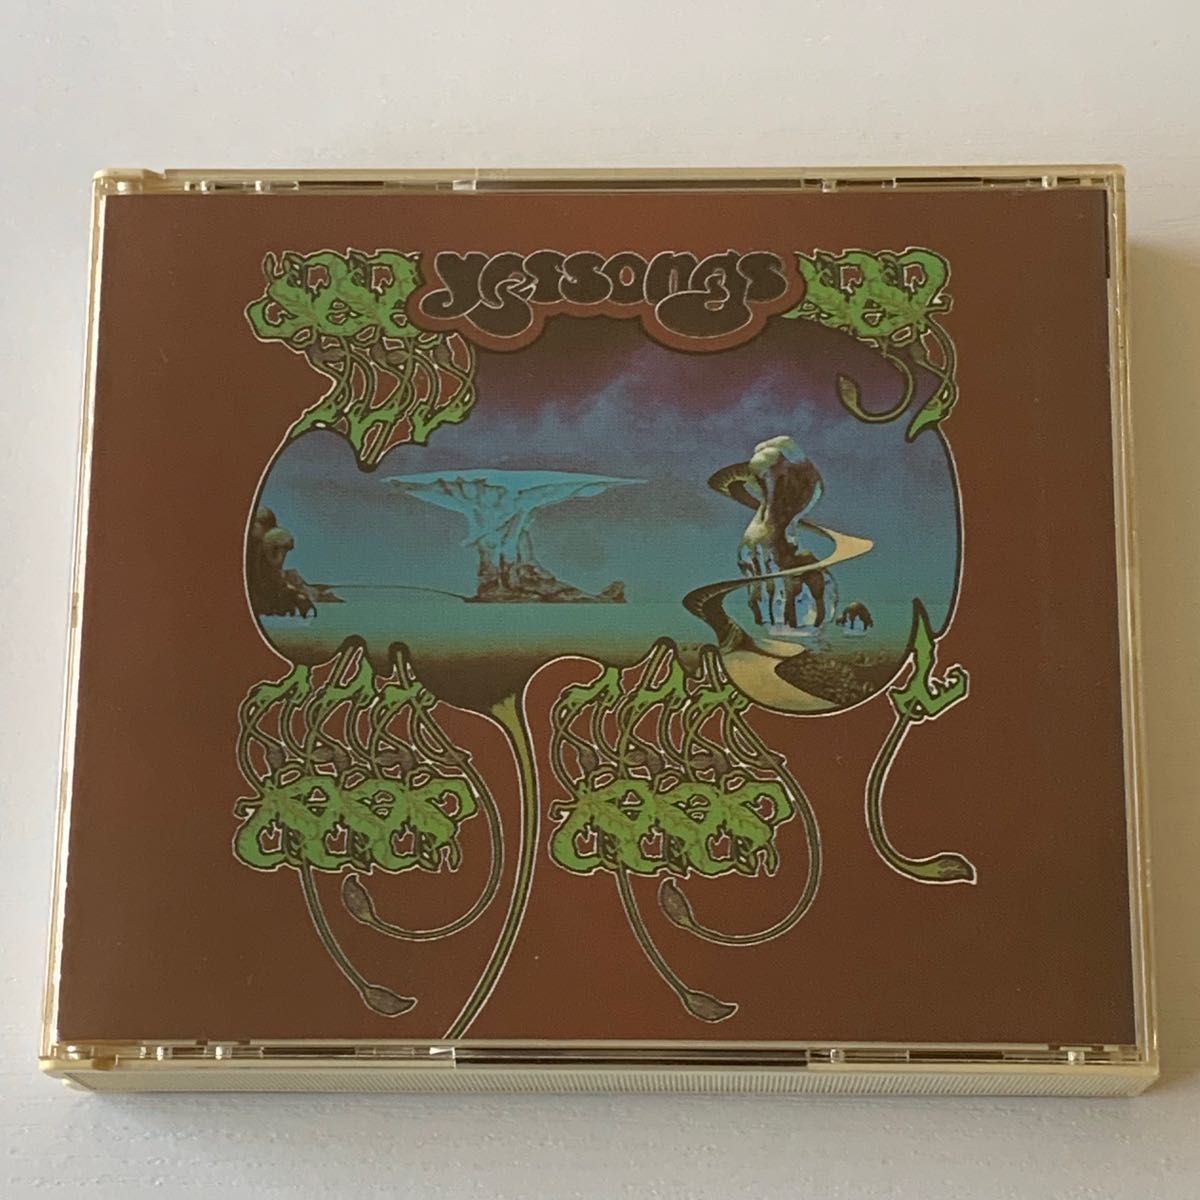 Yessongs (1973) / Yes